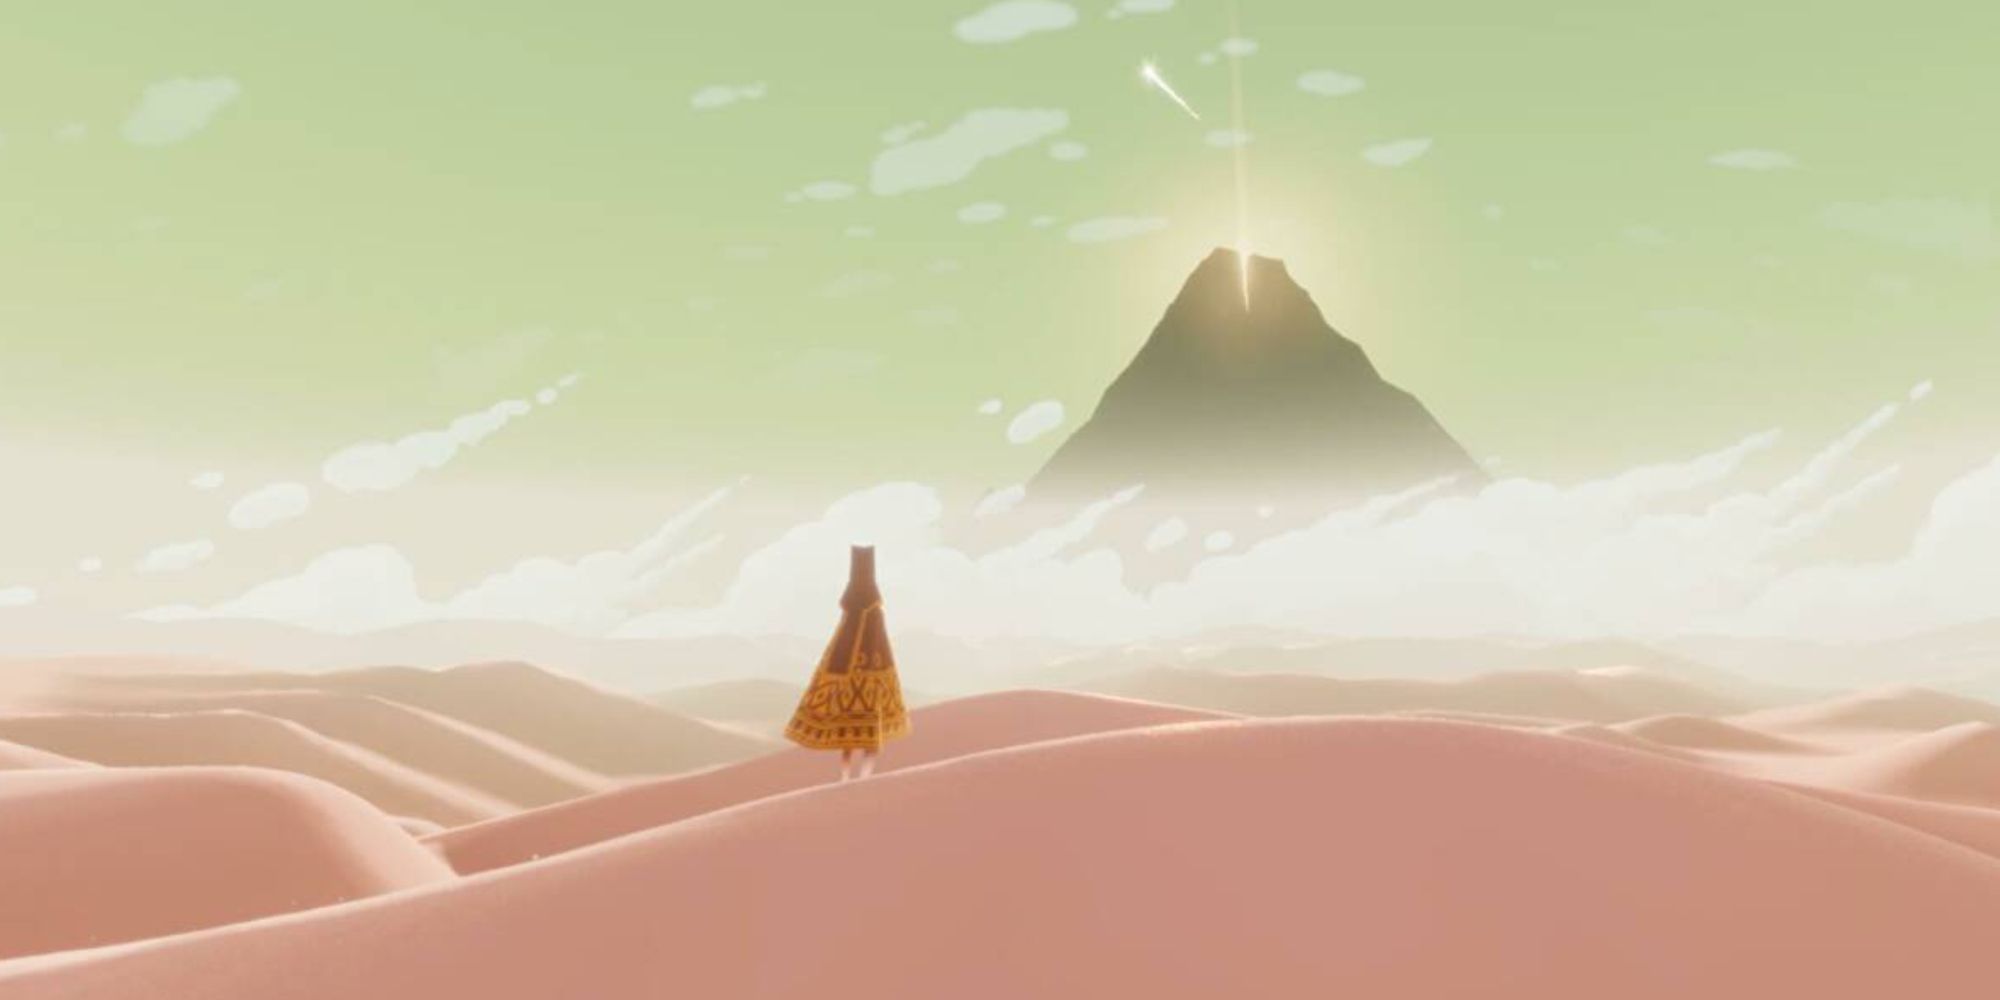 The traveler looks at the mountain in the distance in the desert in Journey